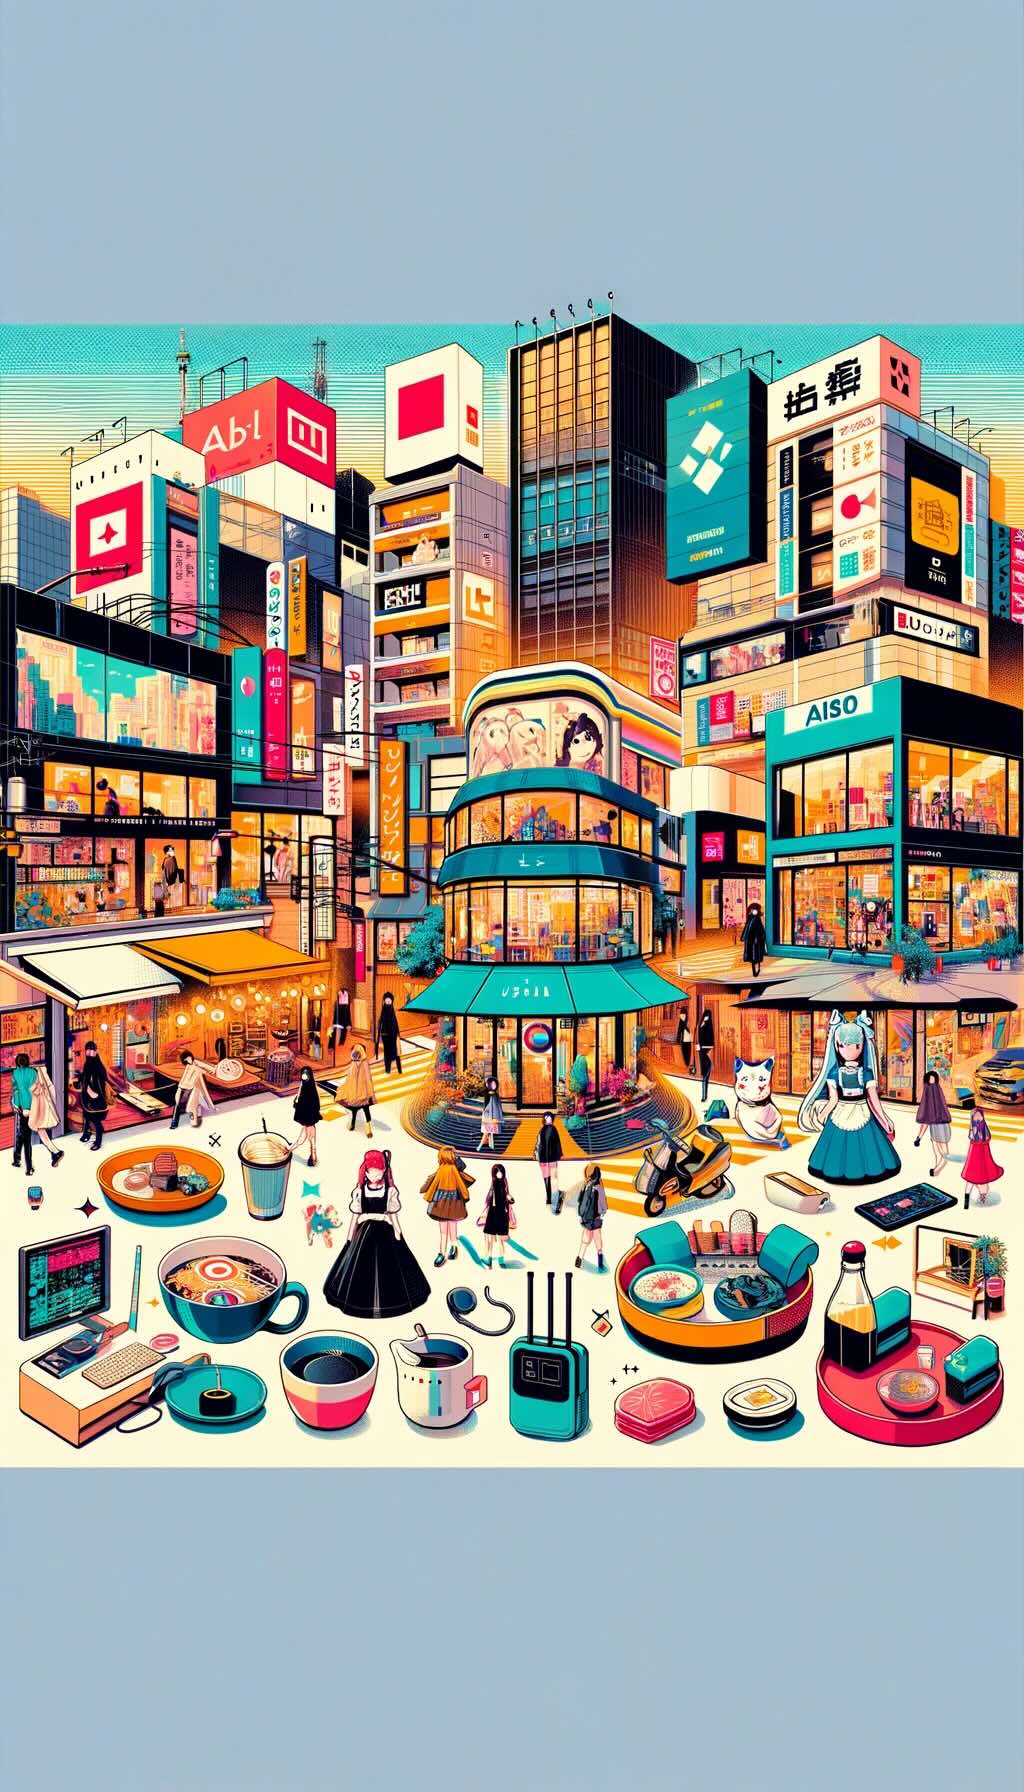 Modern shopping trends and popular districts in Japan vividly portrays the eclectic street fashion of Harajuku, the luxury boutiques of Ginza, Shibuya's trendy shops, Akihabara's 'Electric Town' with electronics and anime culture, unique themed cafes, and the minimalist home and lifestyle stores like MUJI, Daiso, and Nitori. The image highlights the diversity, vibrancy, and creativity of modern shopping in Japan